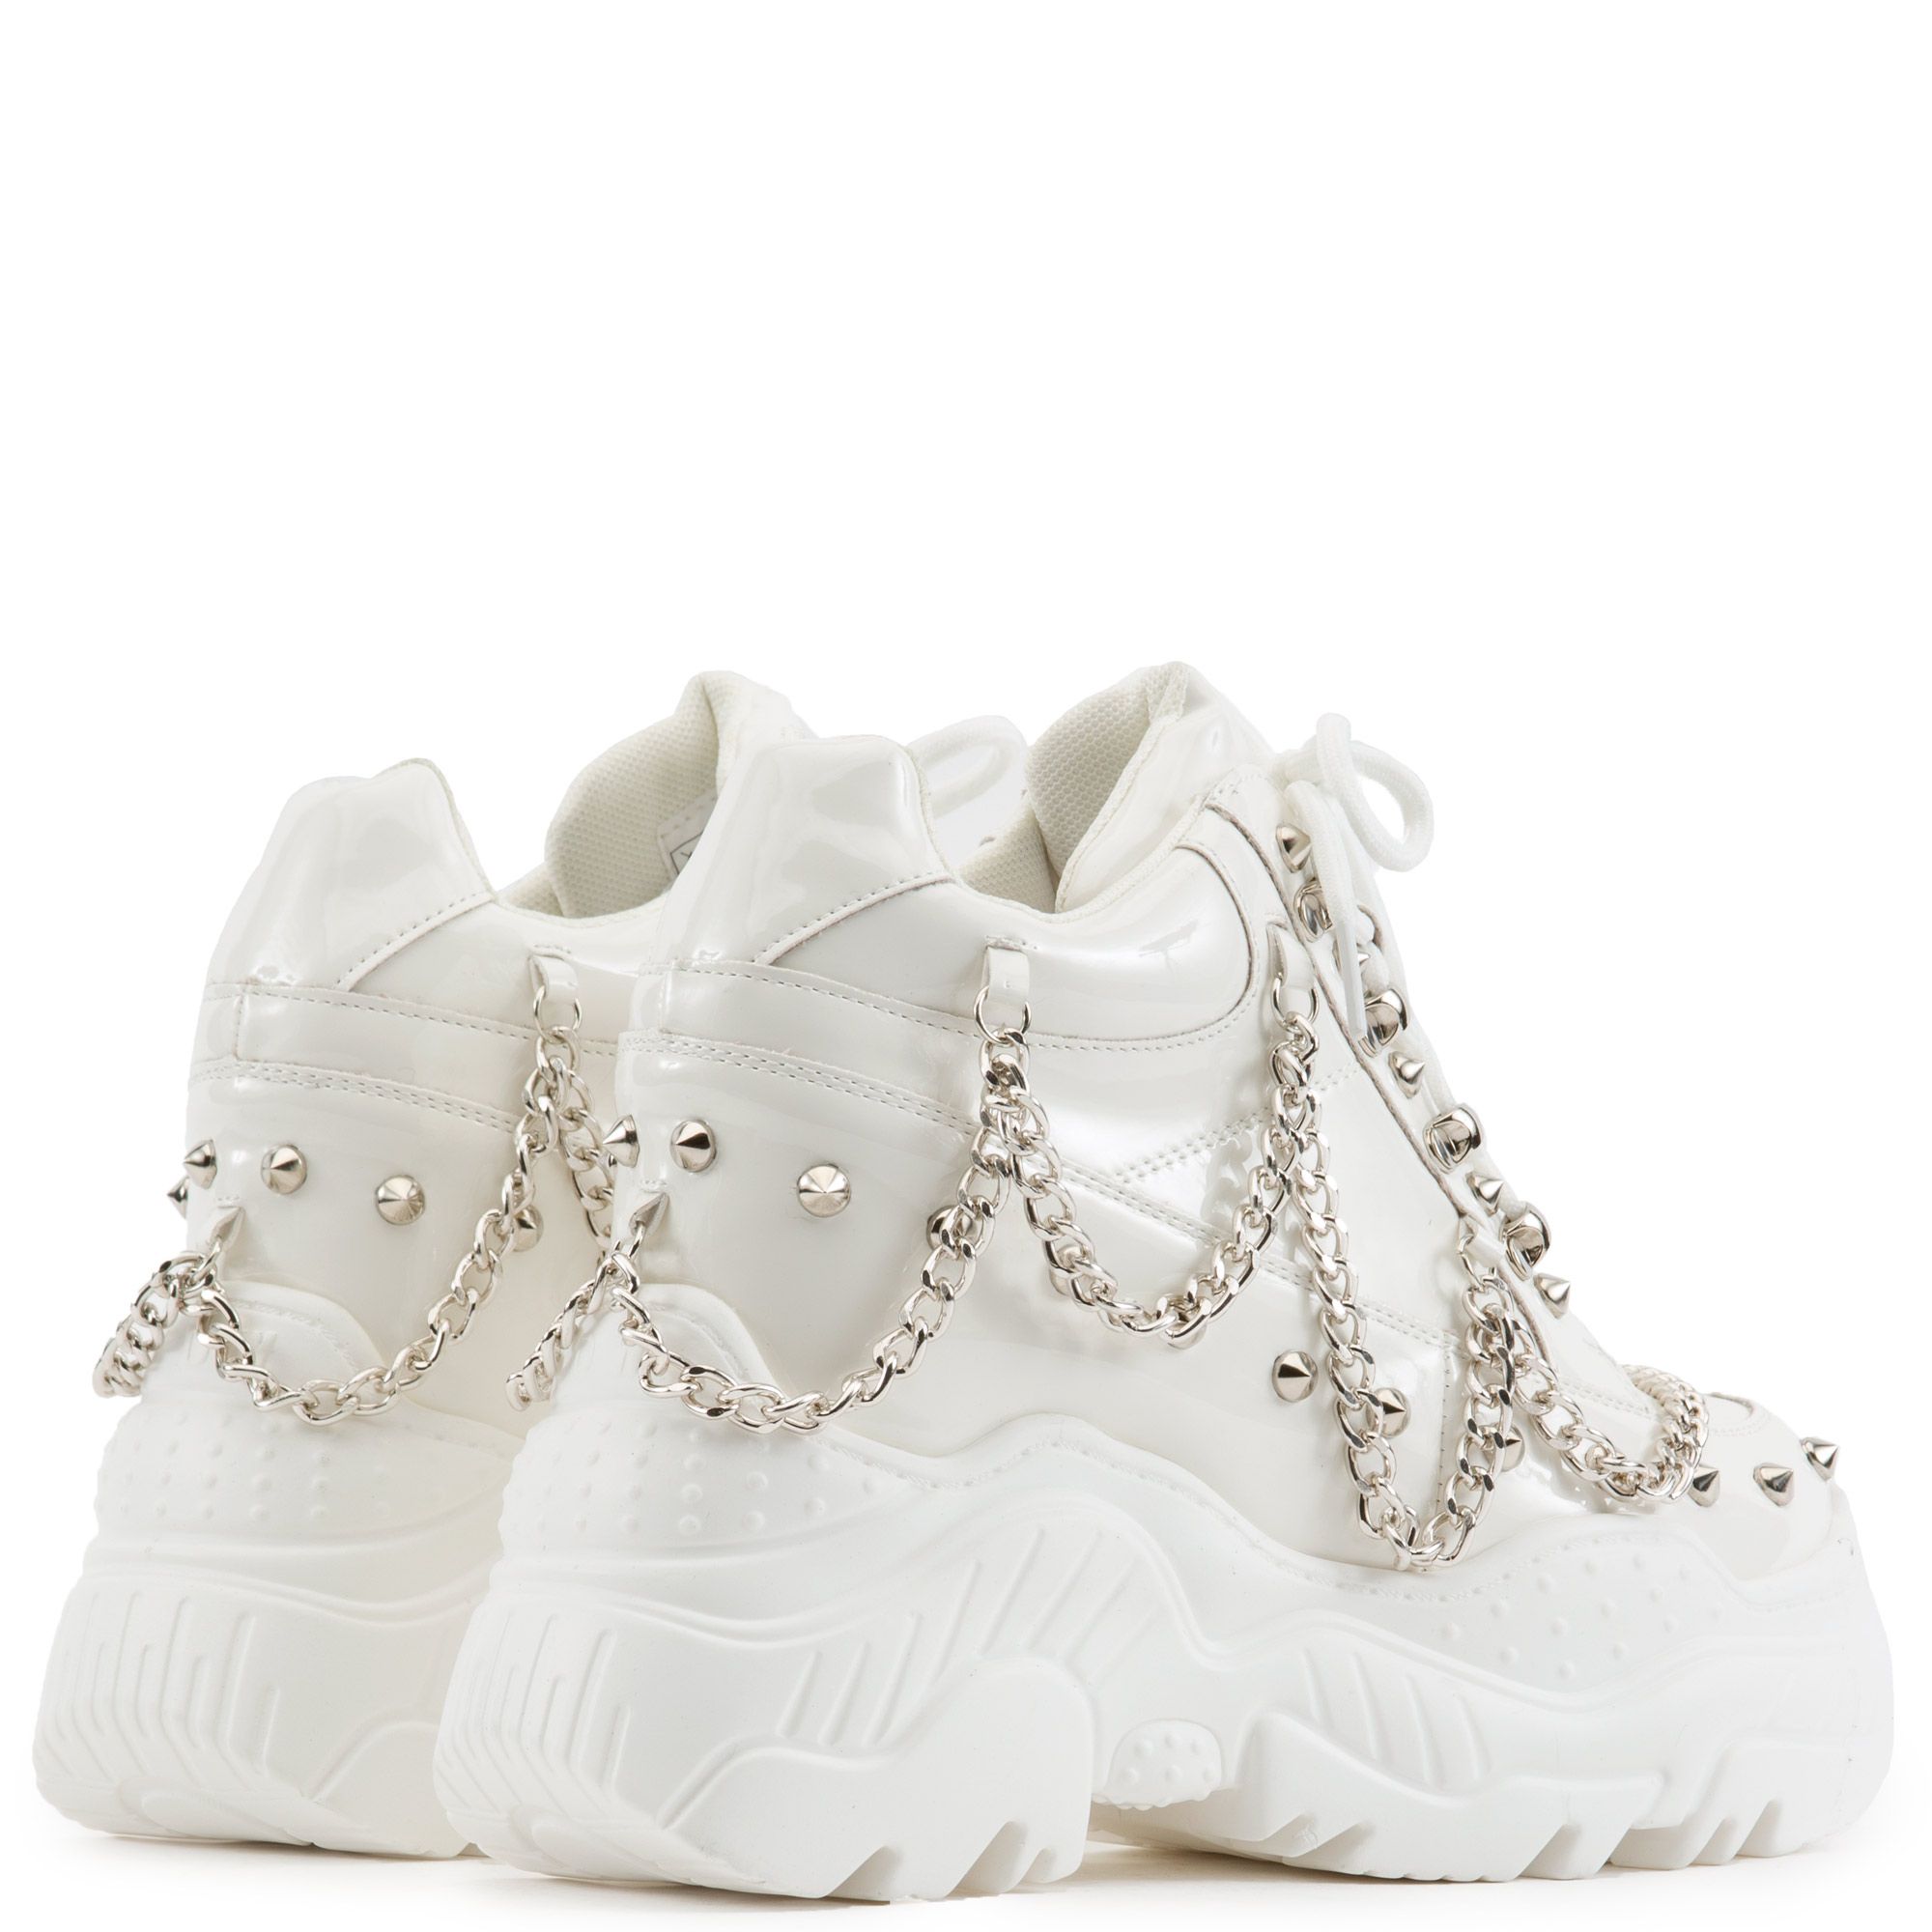 ANTHONY WANG Space Candy Platform Sneakers with Studs SPACE CANDY